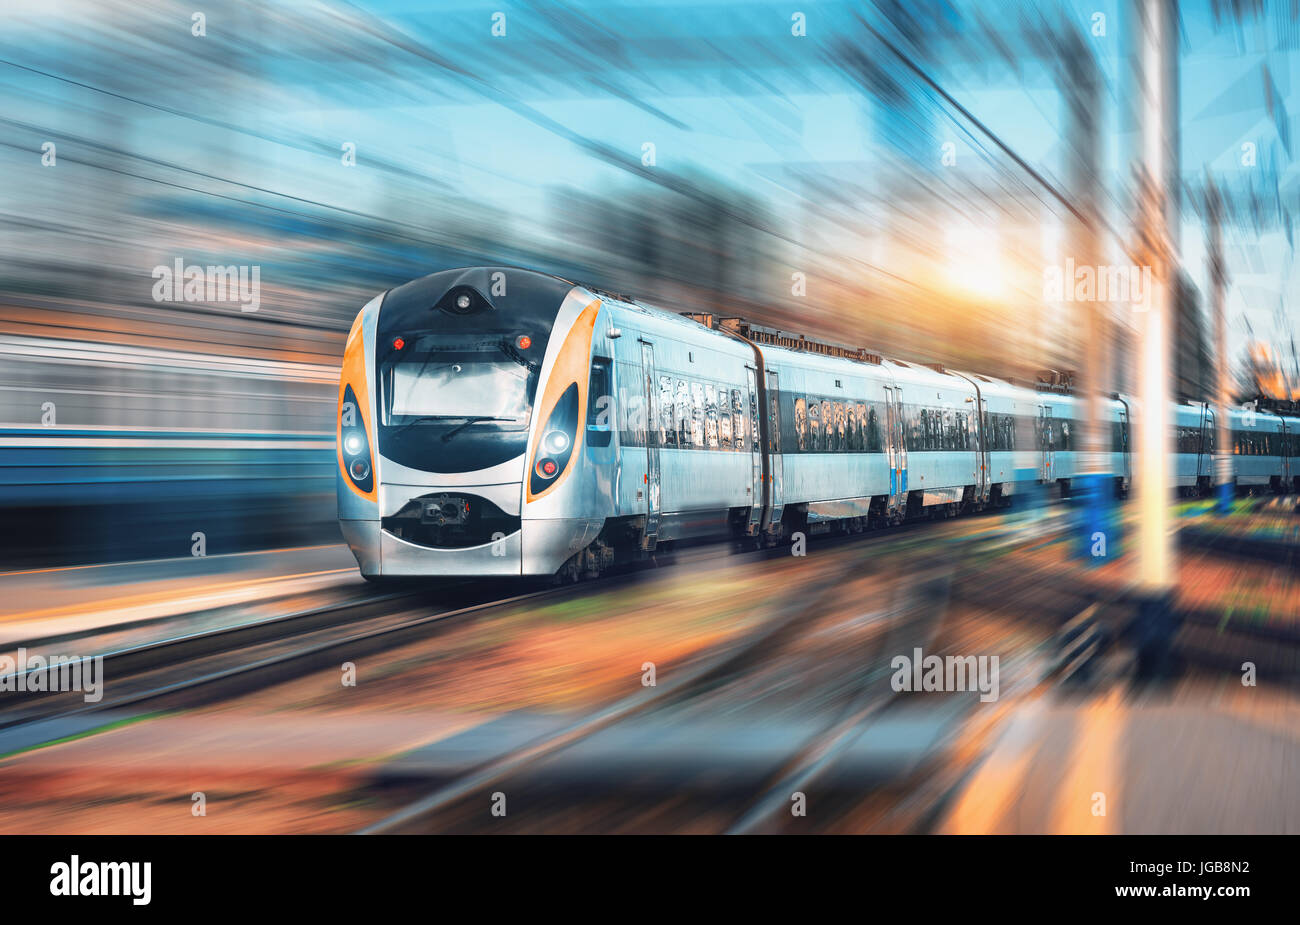 High speed commuter train at the railway station at sunset in Europe. Modern intercity train on railway platform. Urban view with beautiful passenger  Stock Photo